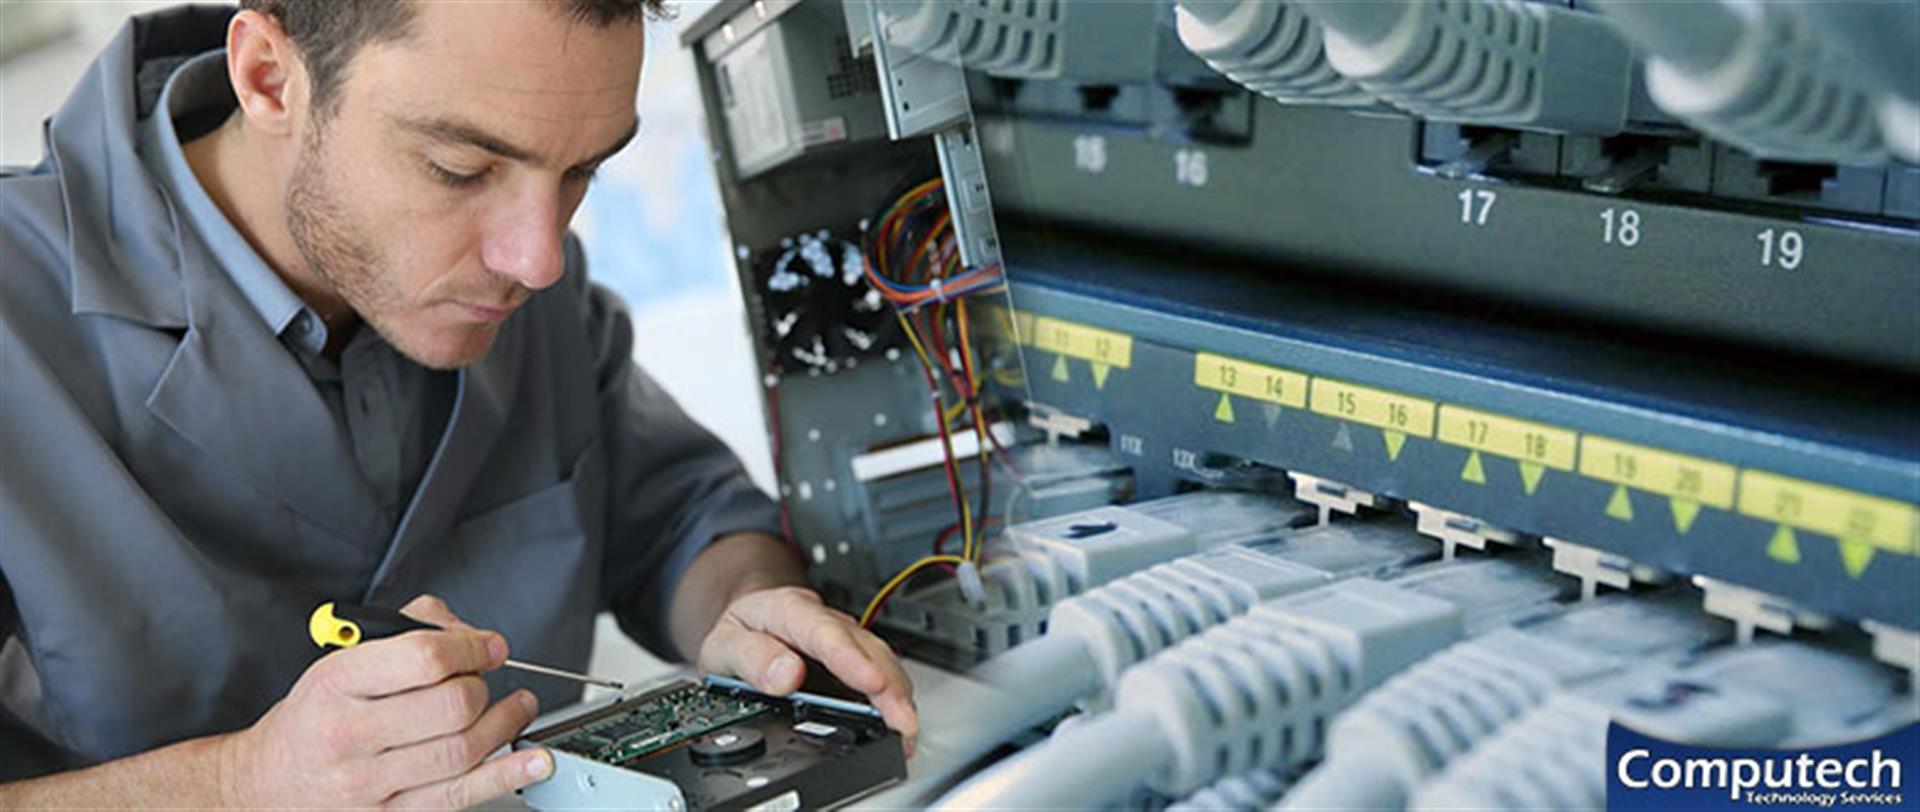 Carthage Tennessee Onsite Computer & Printer Repairs, Network, Voice & Data Cabling Solutions